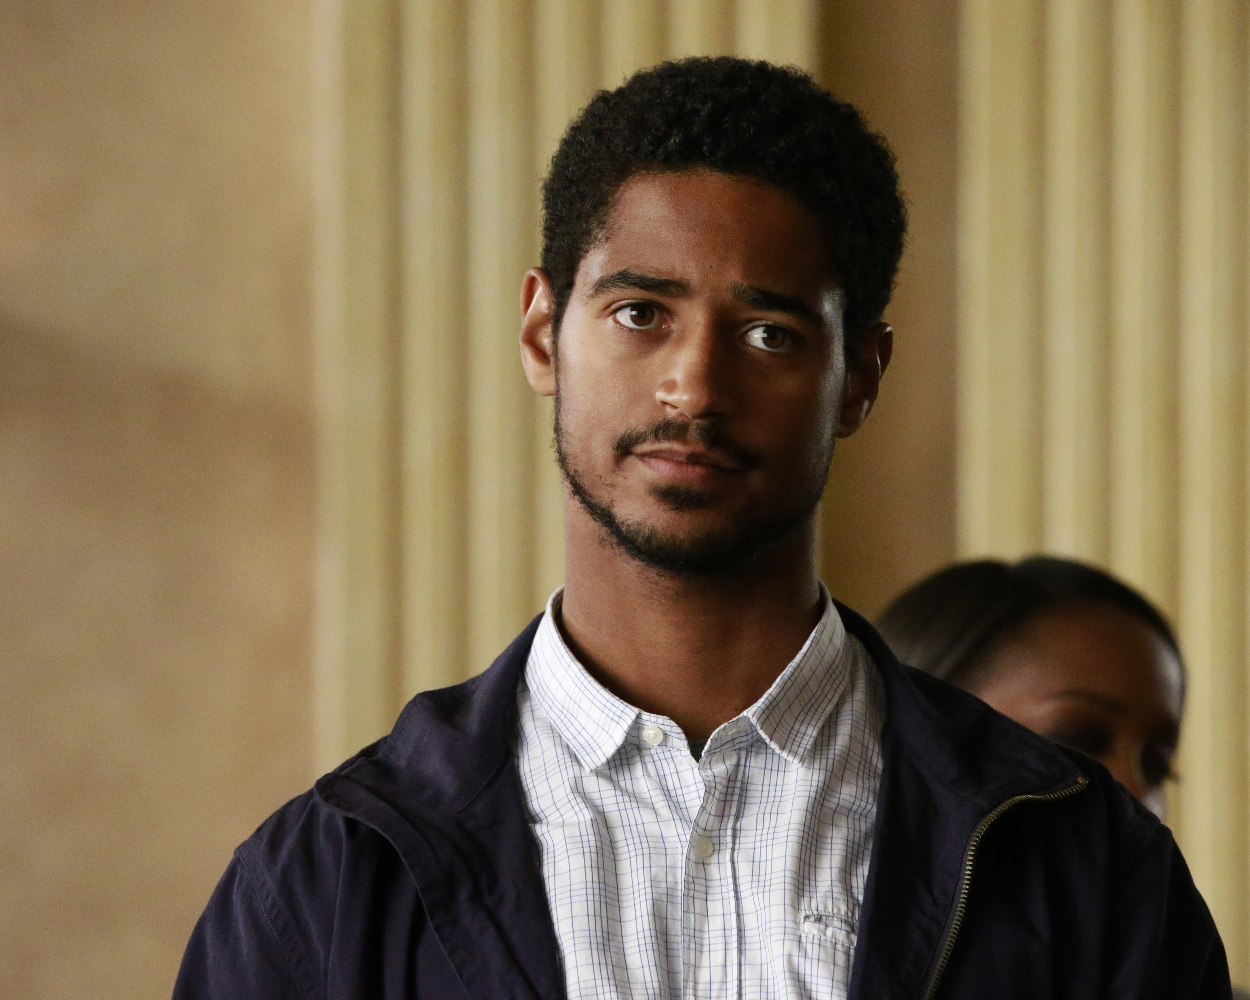 How To Get Away With Murder 3x04 - ALFRED ENOCH